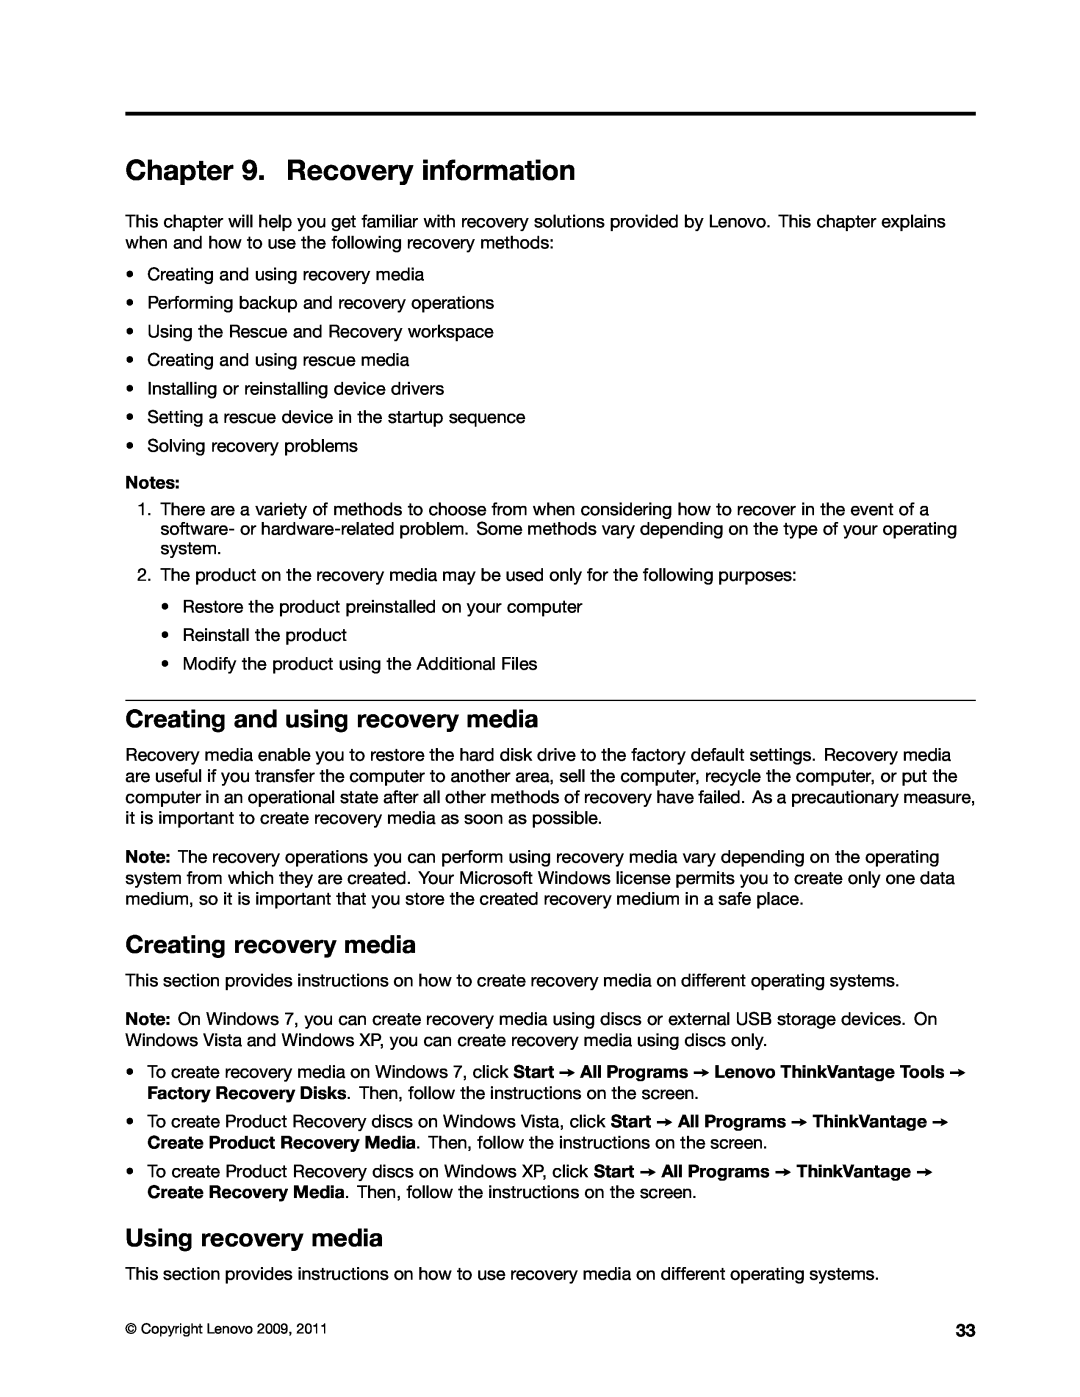 Lenovo 4217, 4157 Recovery information, Creating and using recovery media, Creating recovery media, Using recovery media 